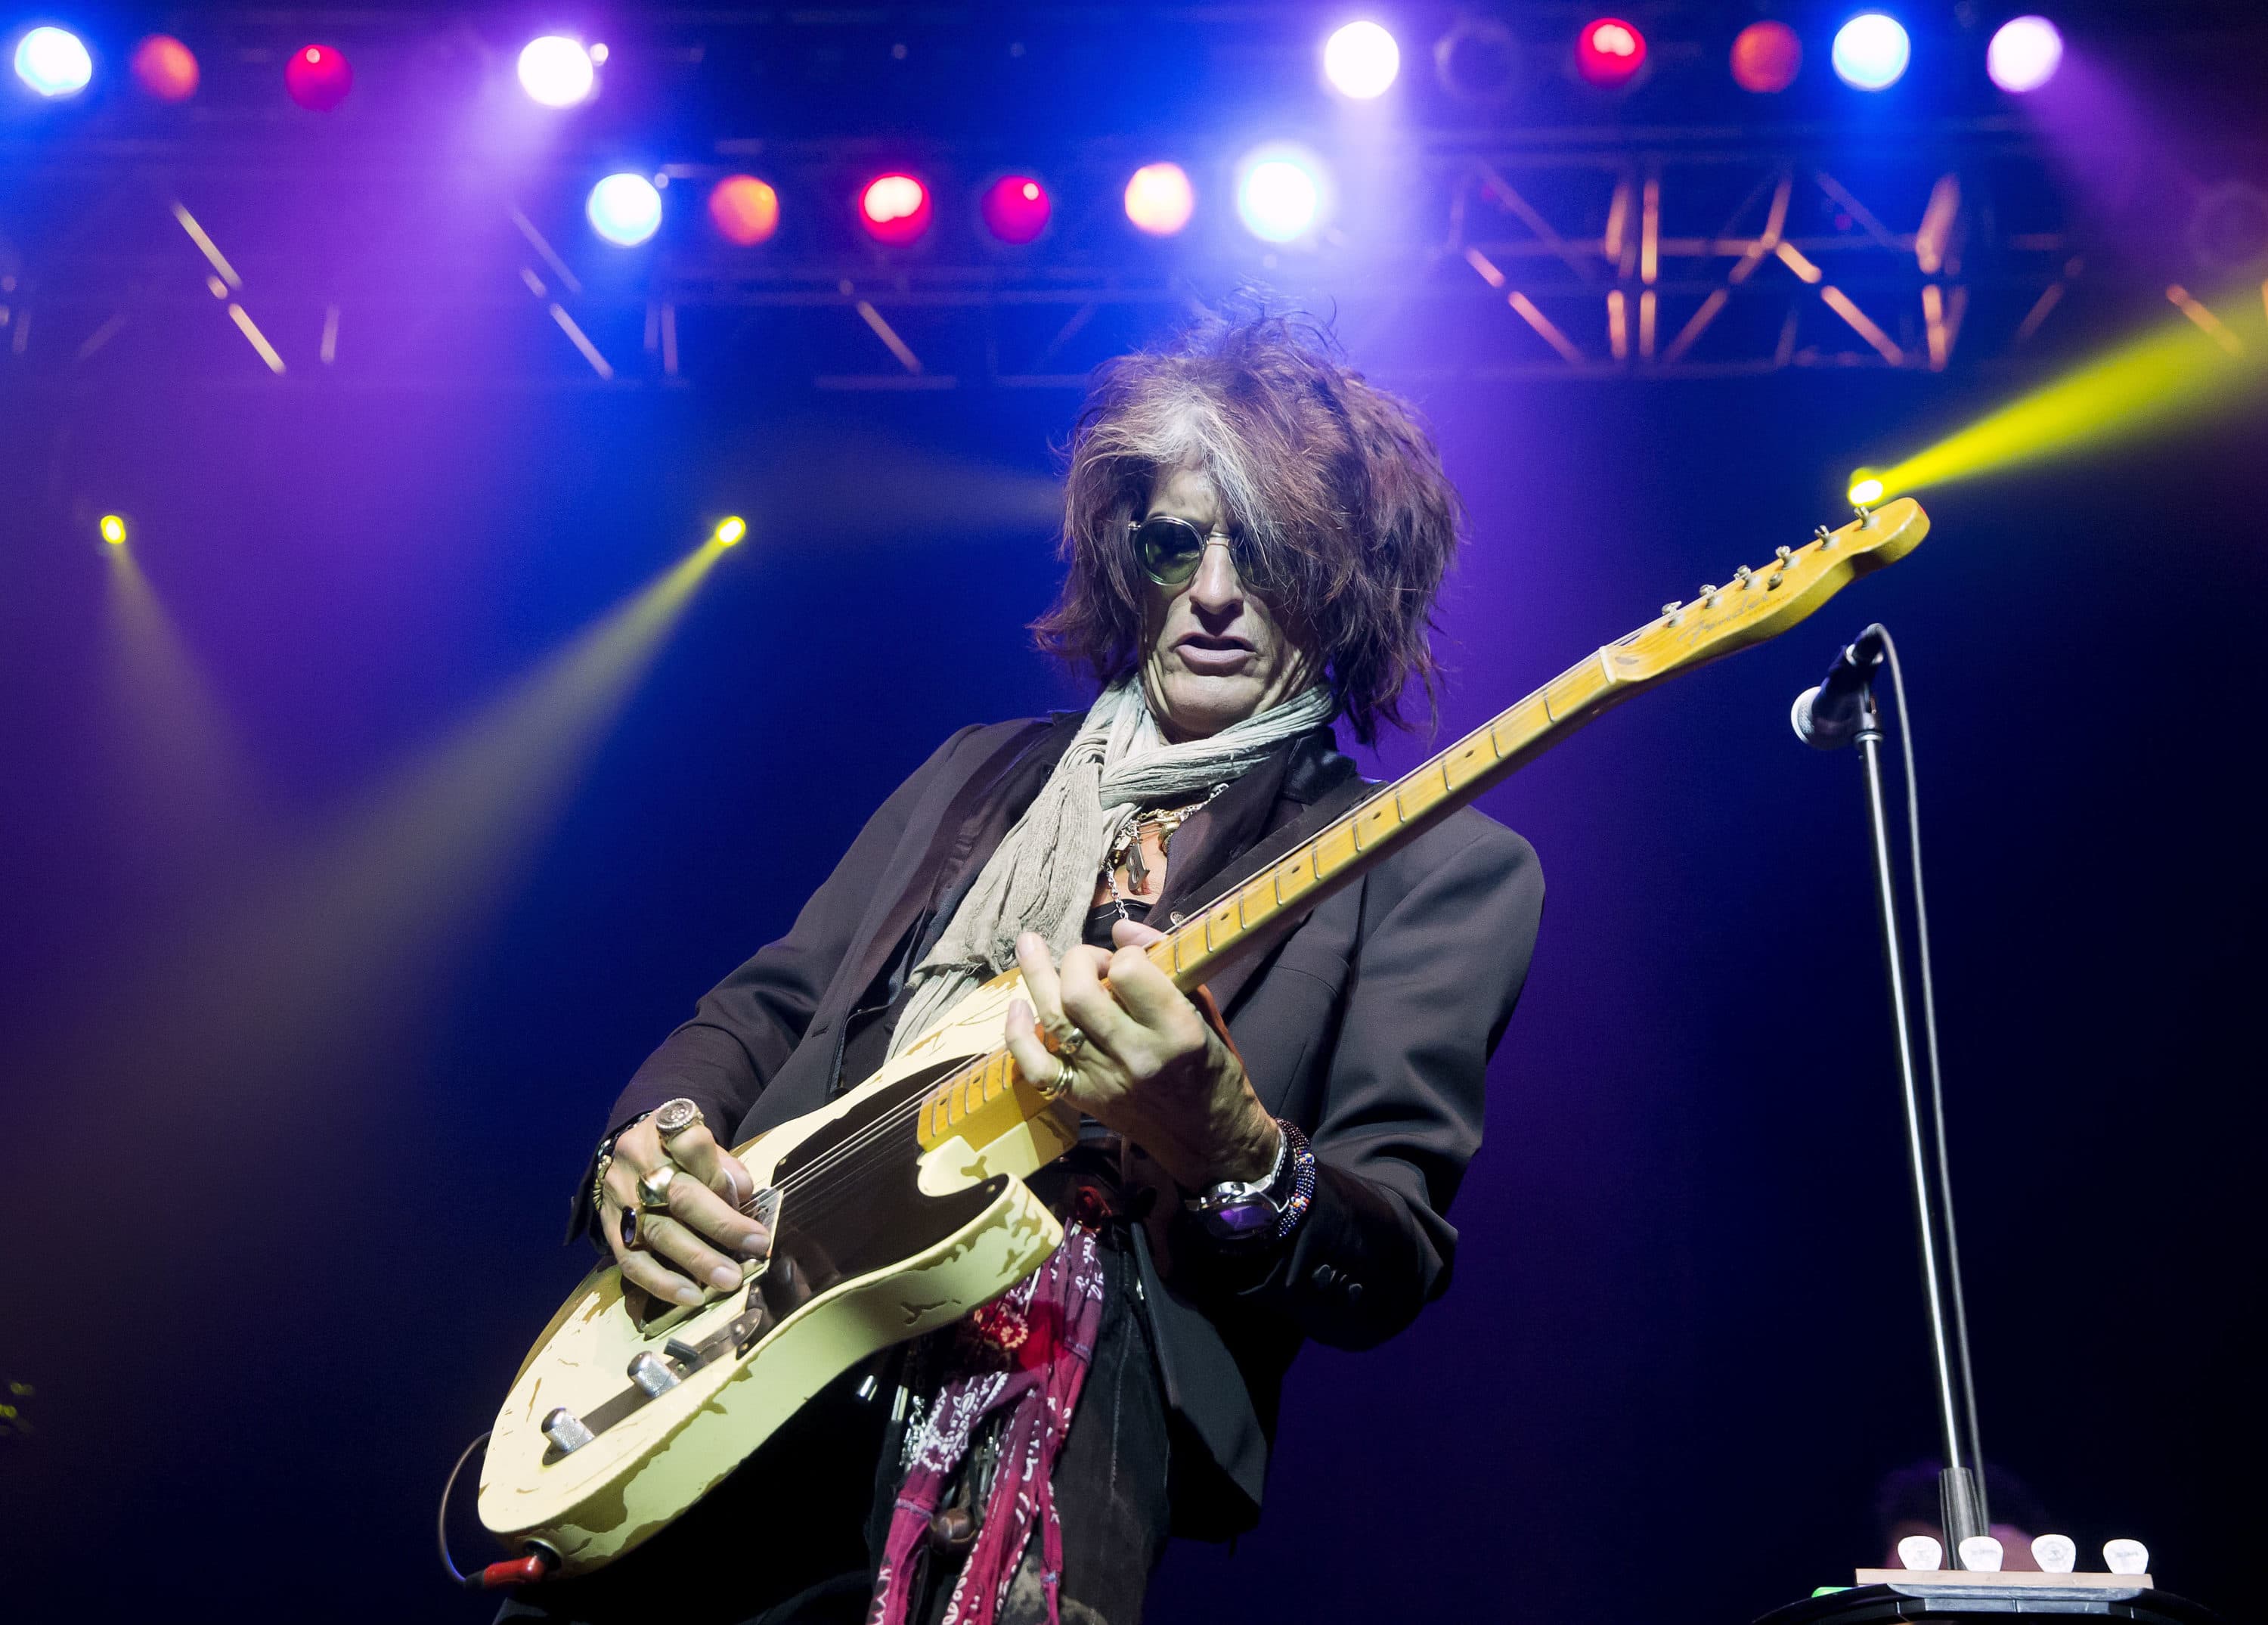 Joe Perry performs with Joe Perry and Friends at the House of Blues on Wednesday, April 18, 2018 in Boston. (Winslow Townson/Invision/AP)